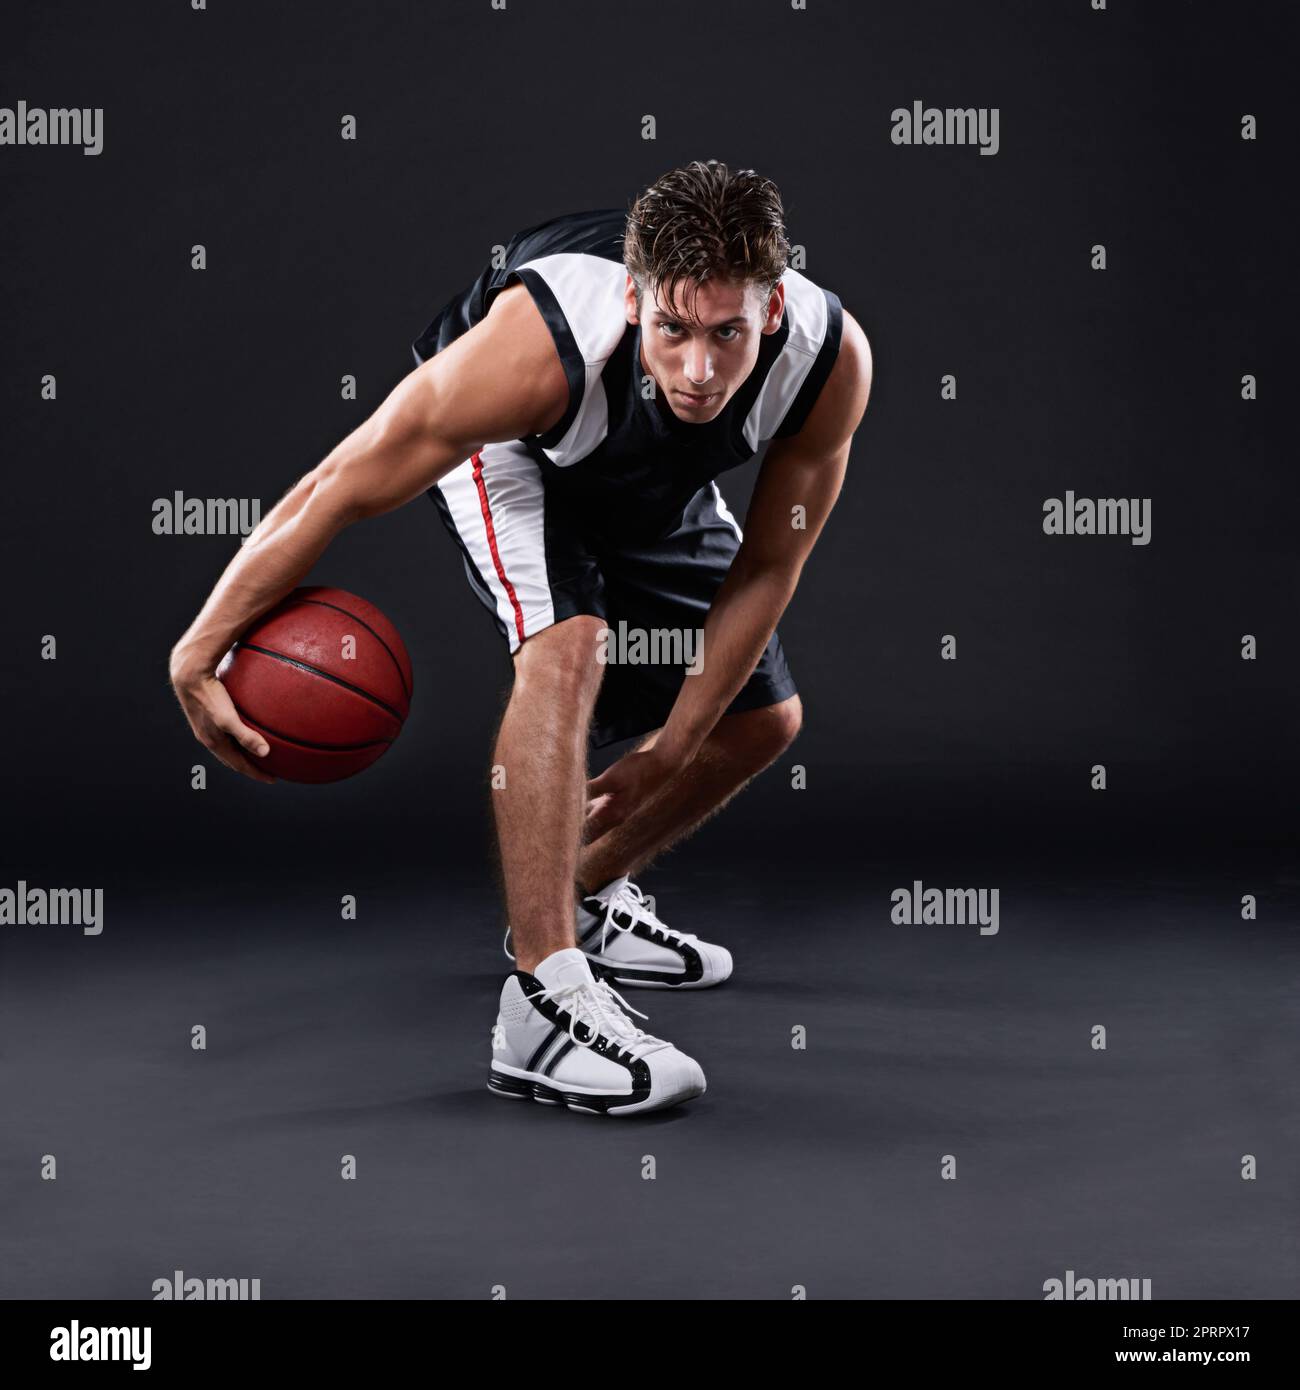 Staying in top form. Full length portrait of a male basketball player in action against a black background. Stock Photo